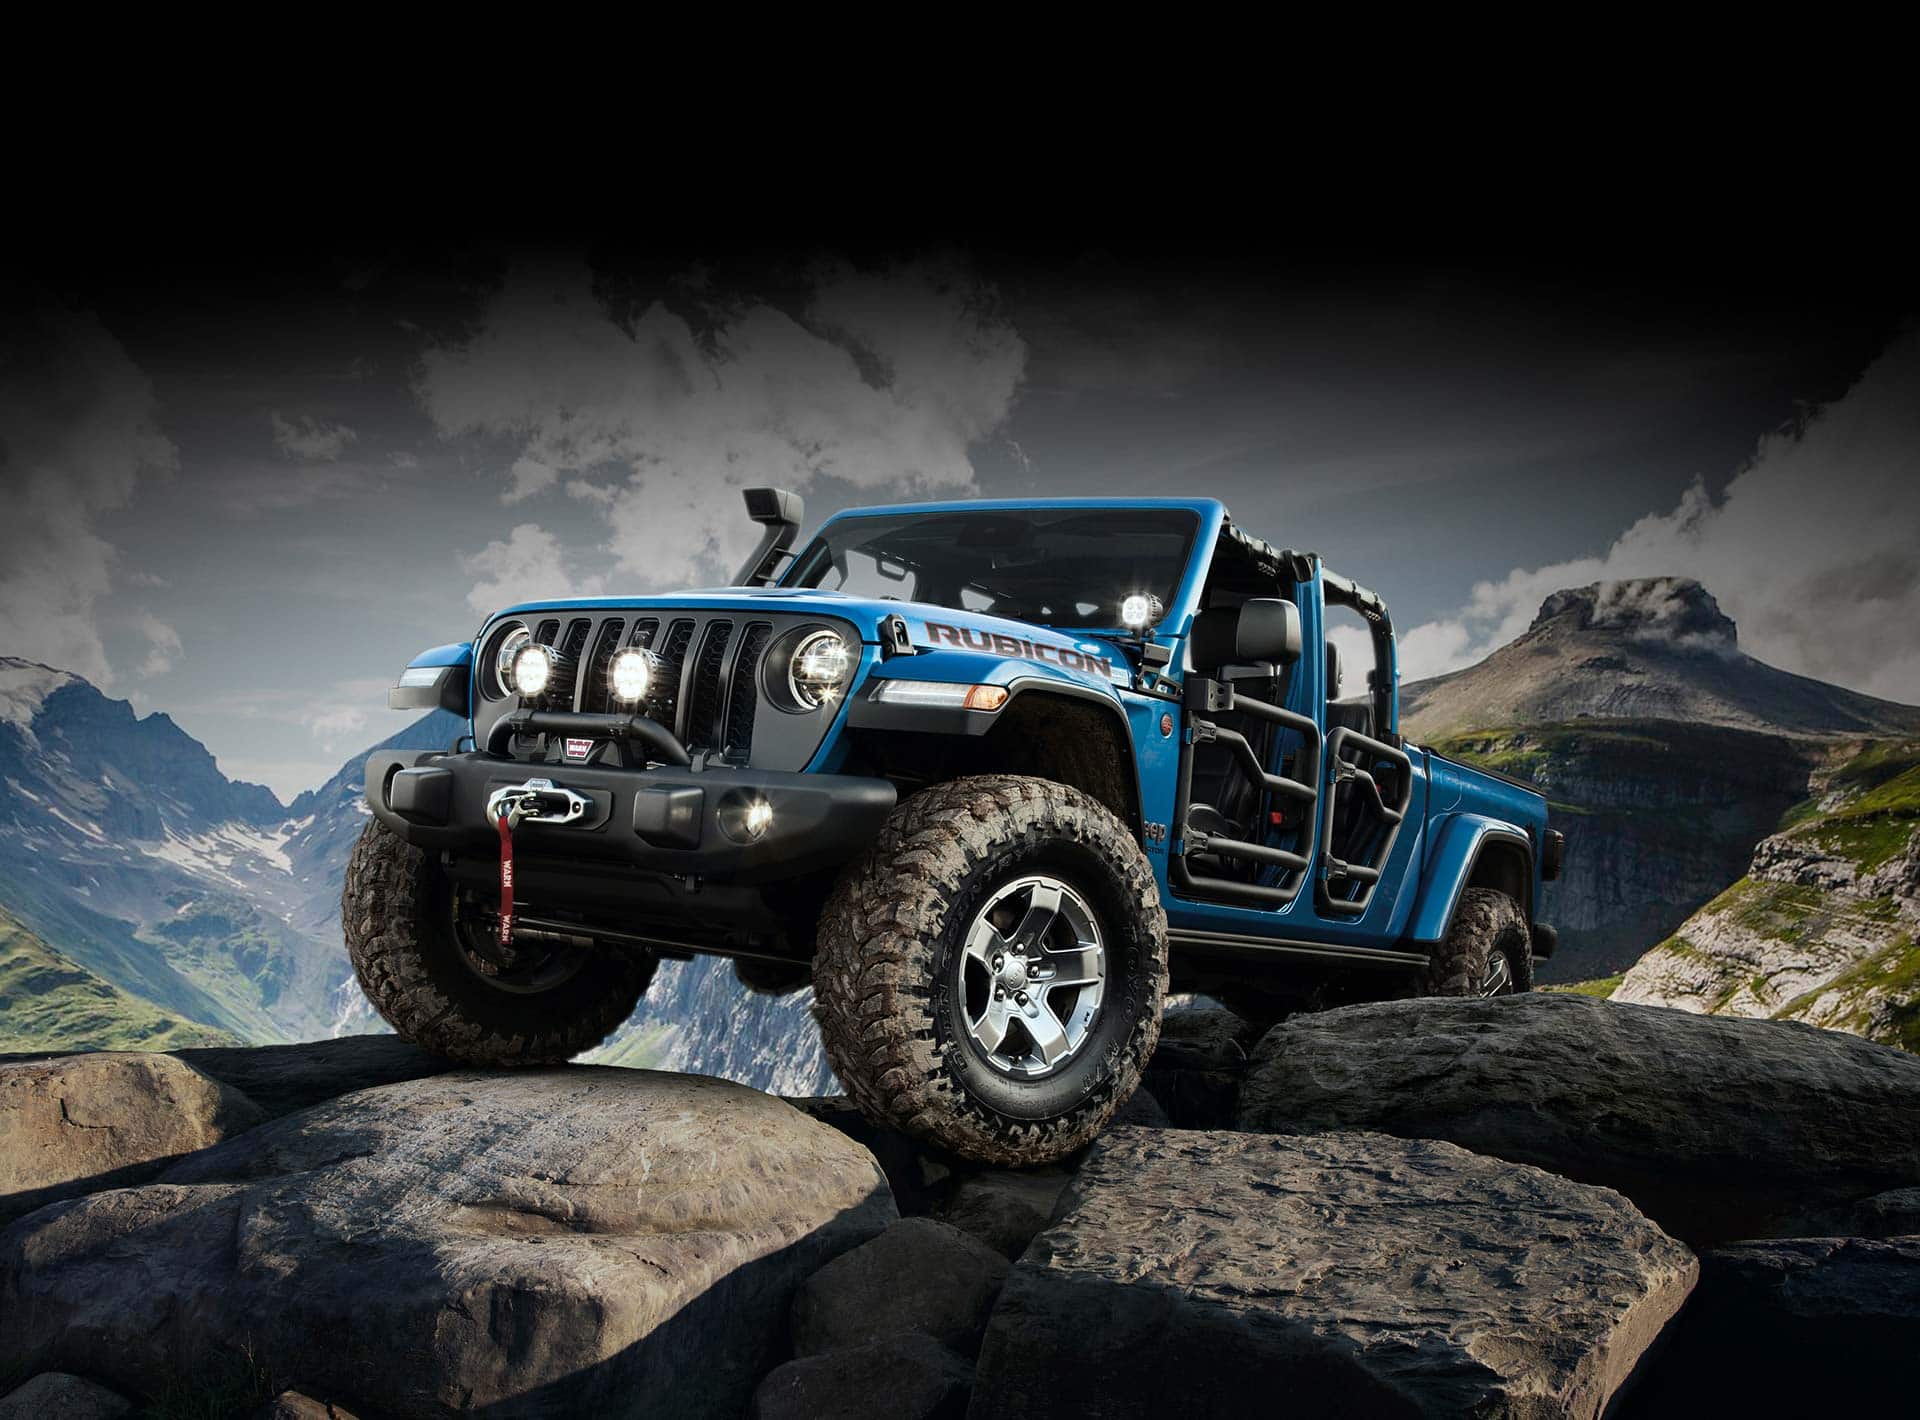 The Jeep Gladiator Rubicon with tube doors, being driven off-road over boulders.